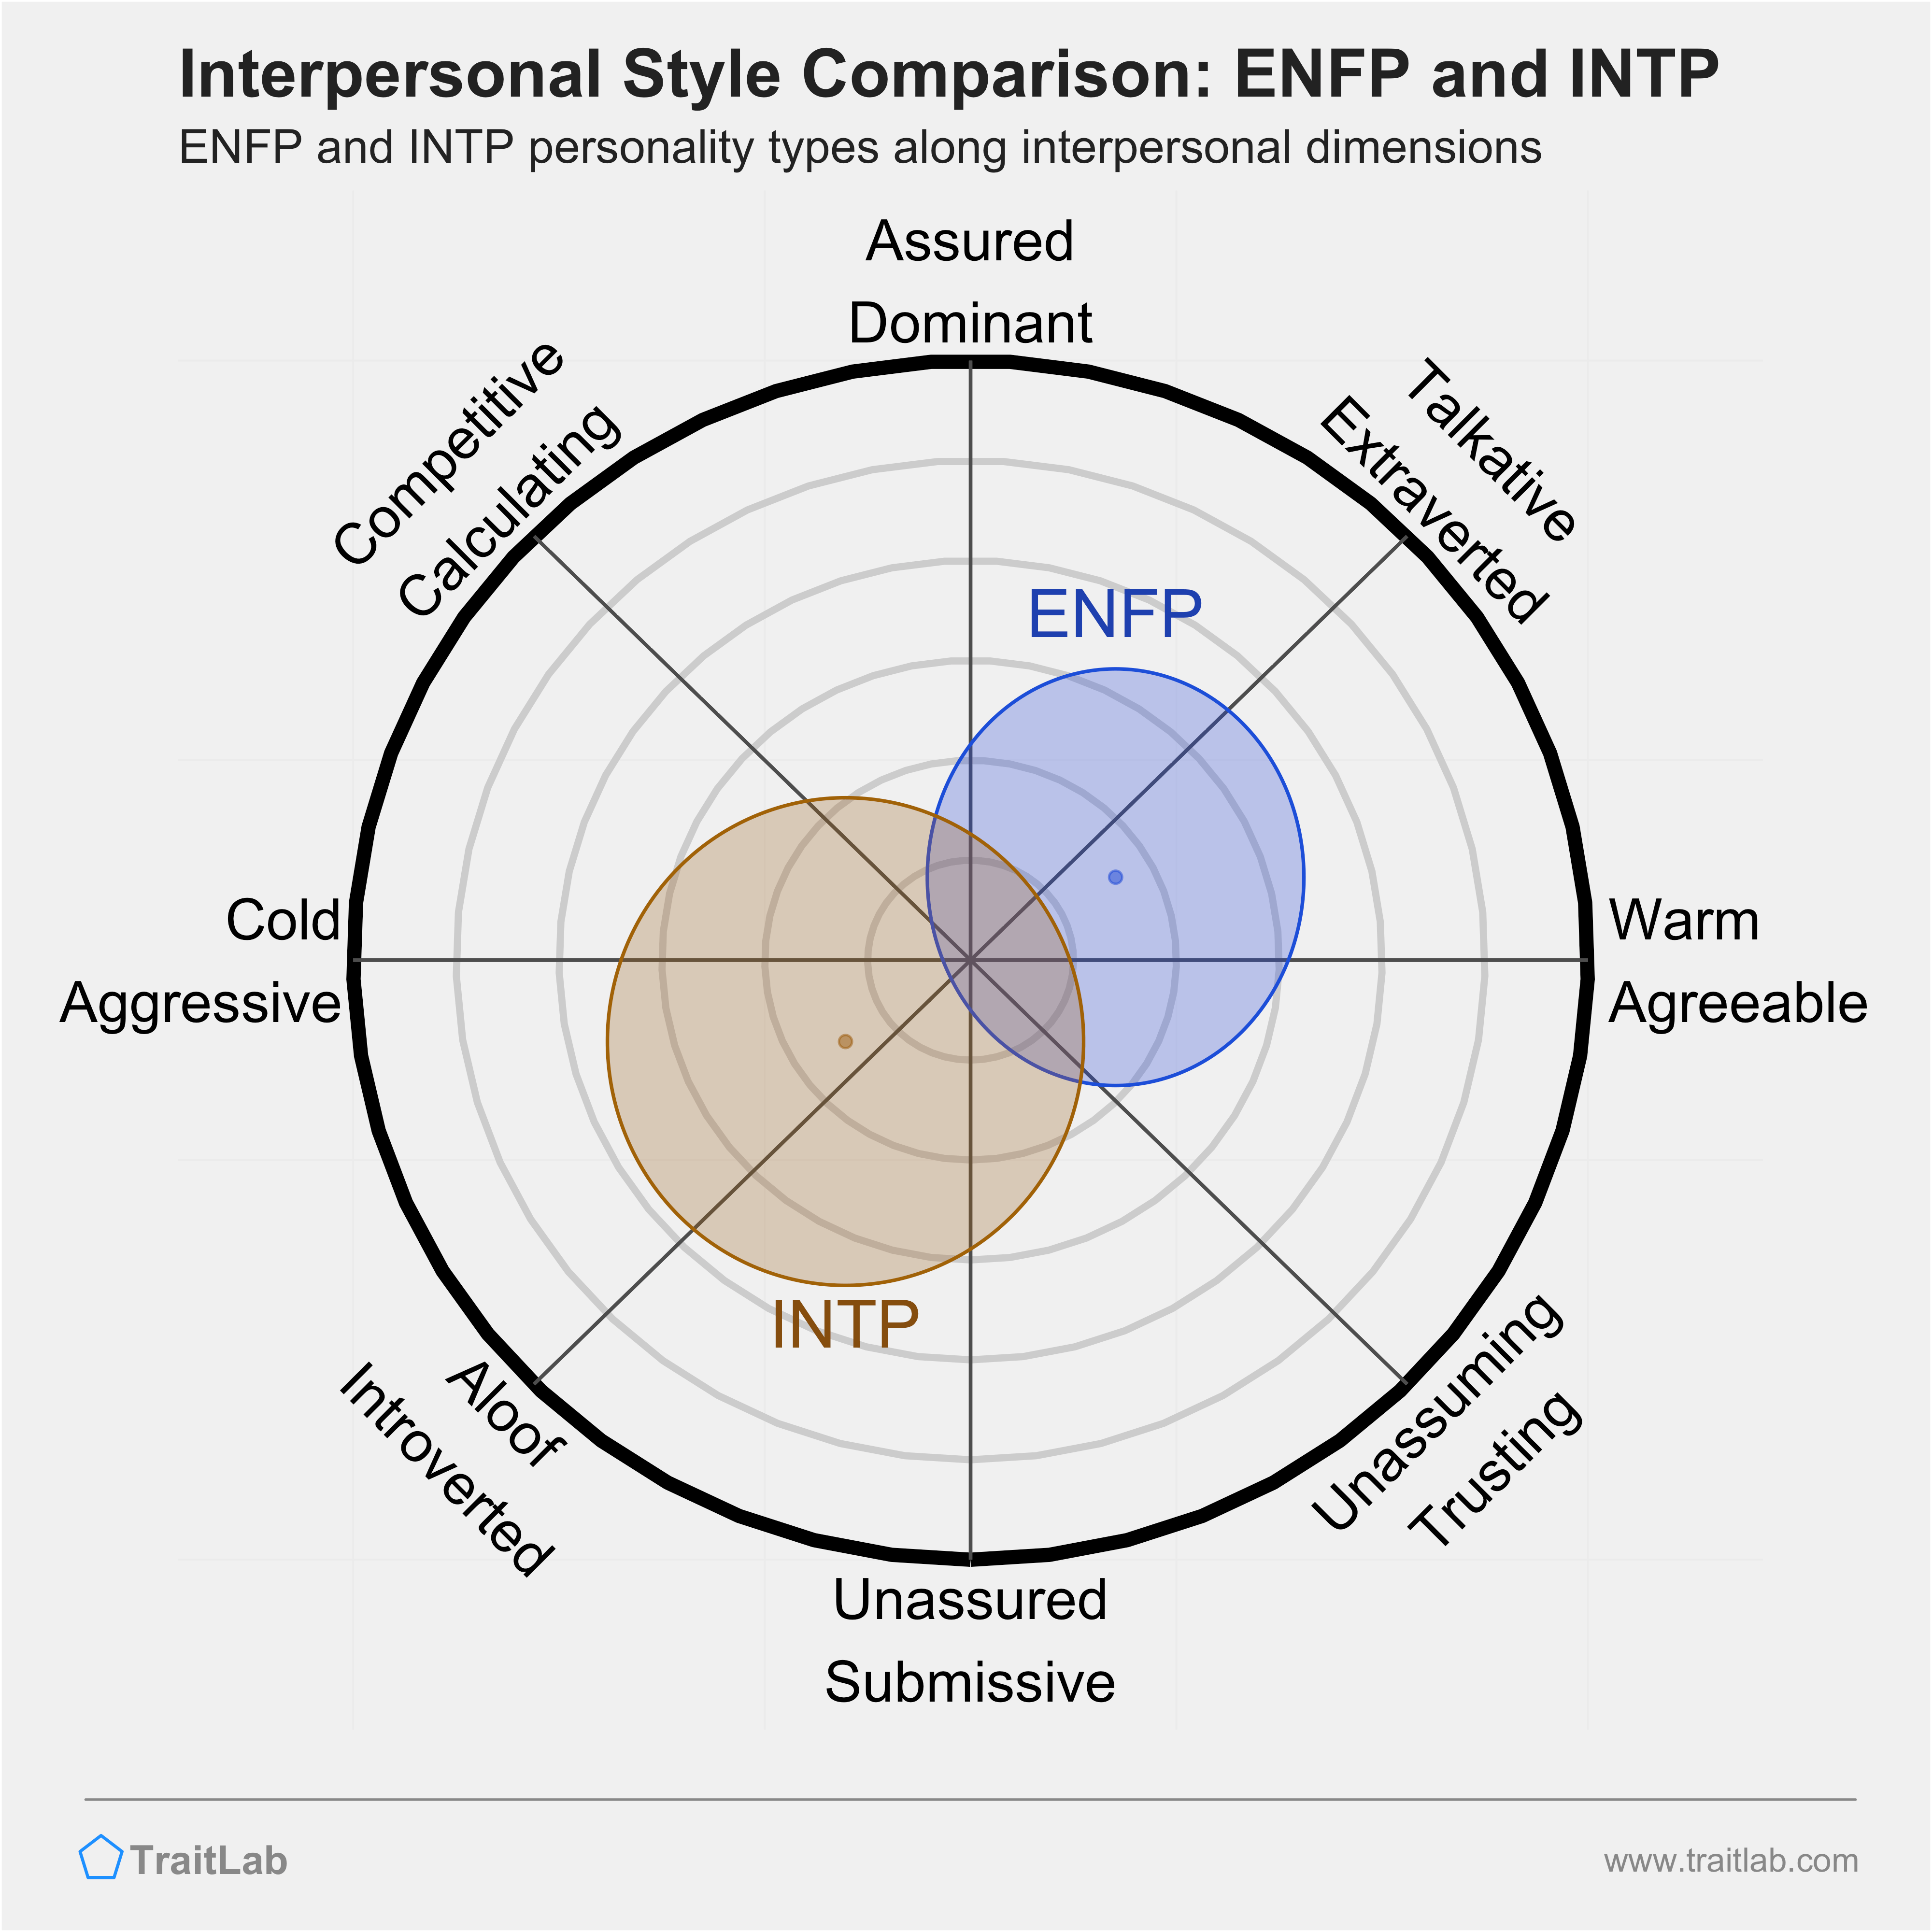 ENFP and INTP comparison across interpersonal dimensions